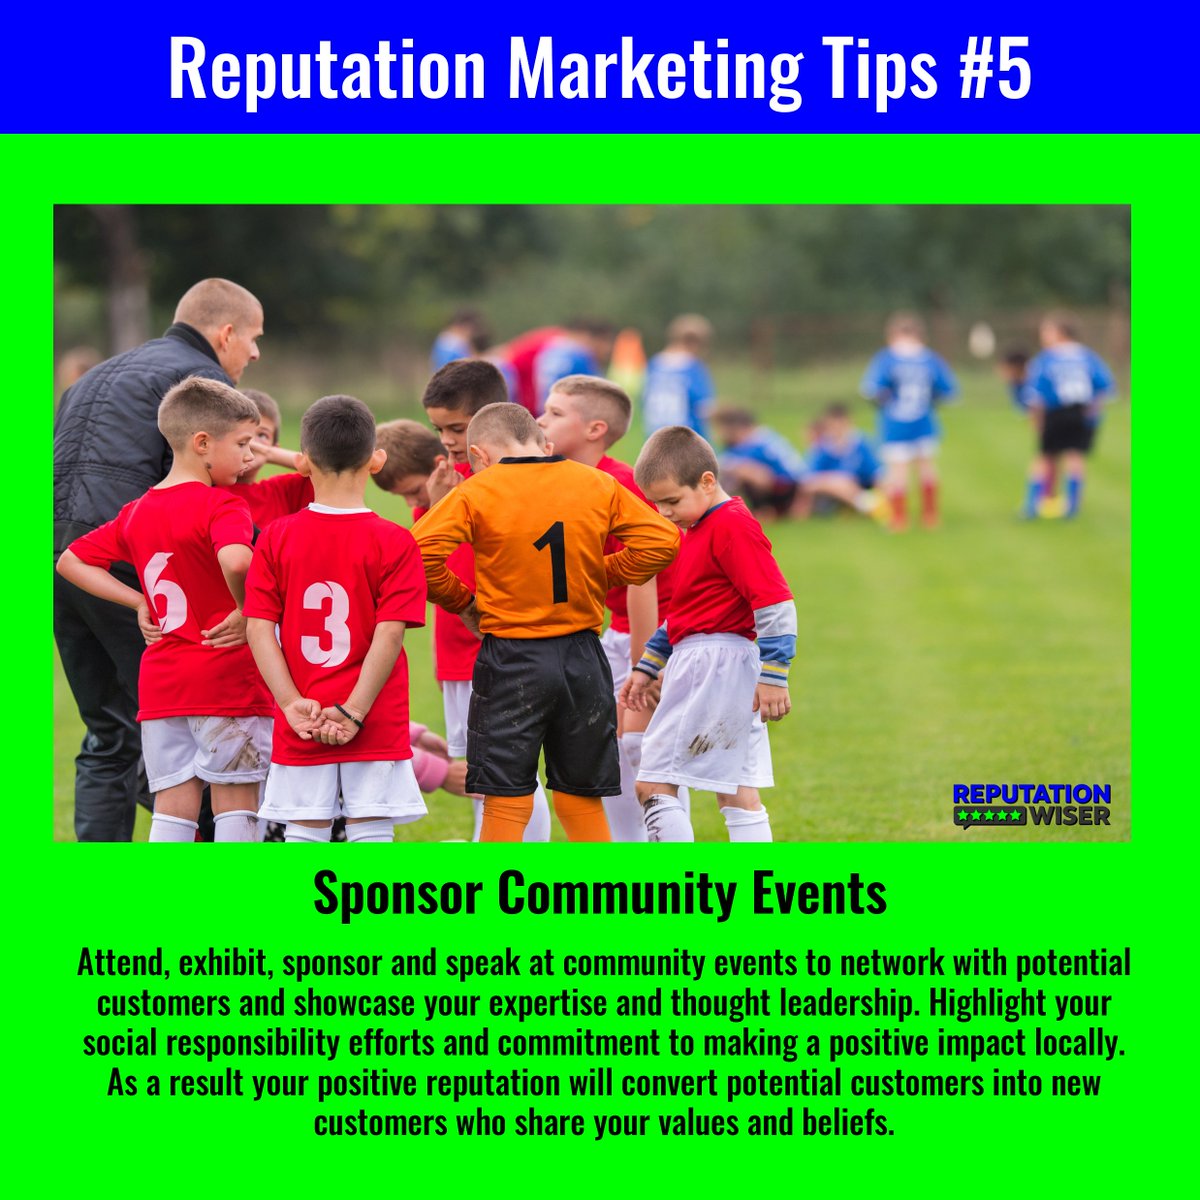 Make an impact in your local market. Be a sponsor of a kids team or event in your community. Better still, start your own event. Make it fun, make it original and your business will receive plenty of attention. #CommunityDriven #FridayMorning #ReputationMarketing #Sponsor